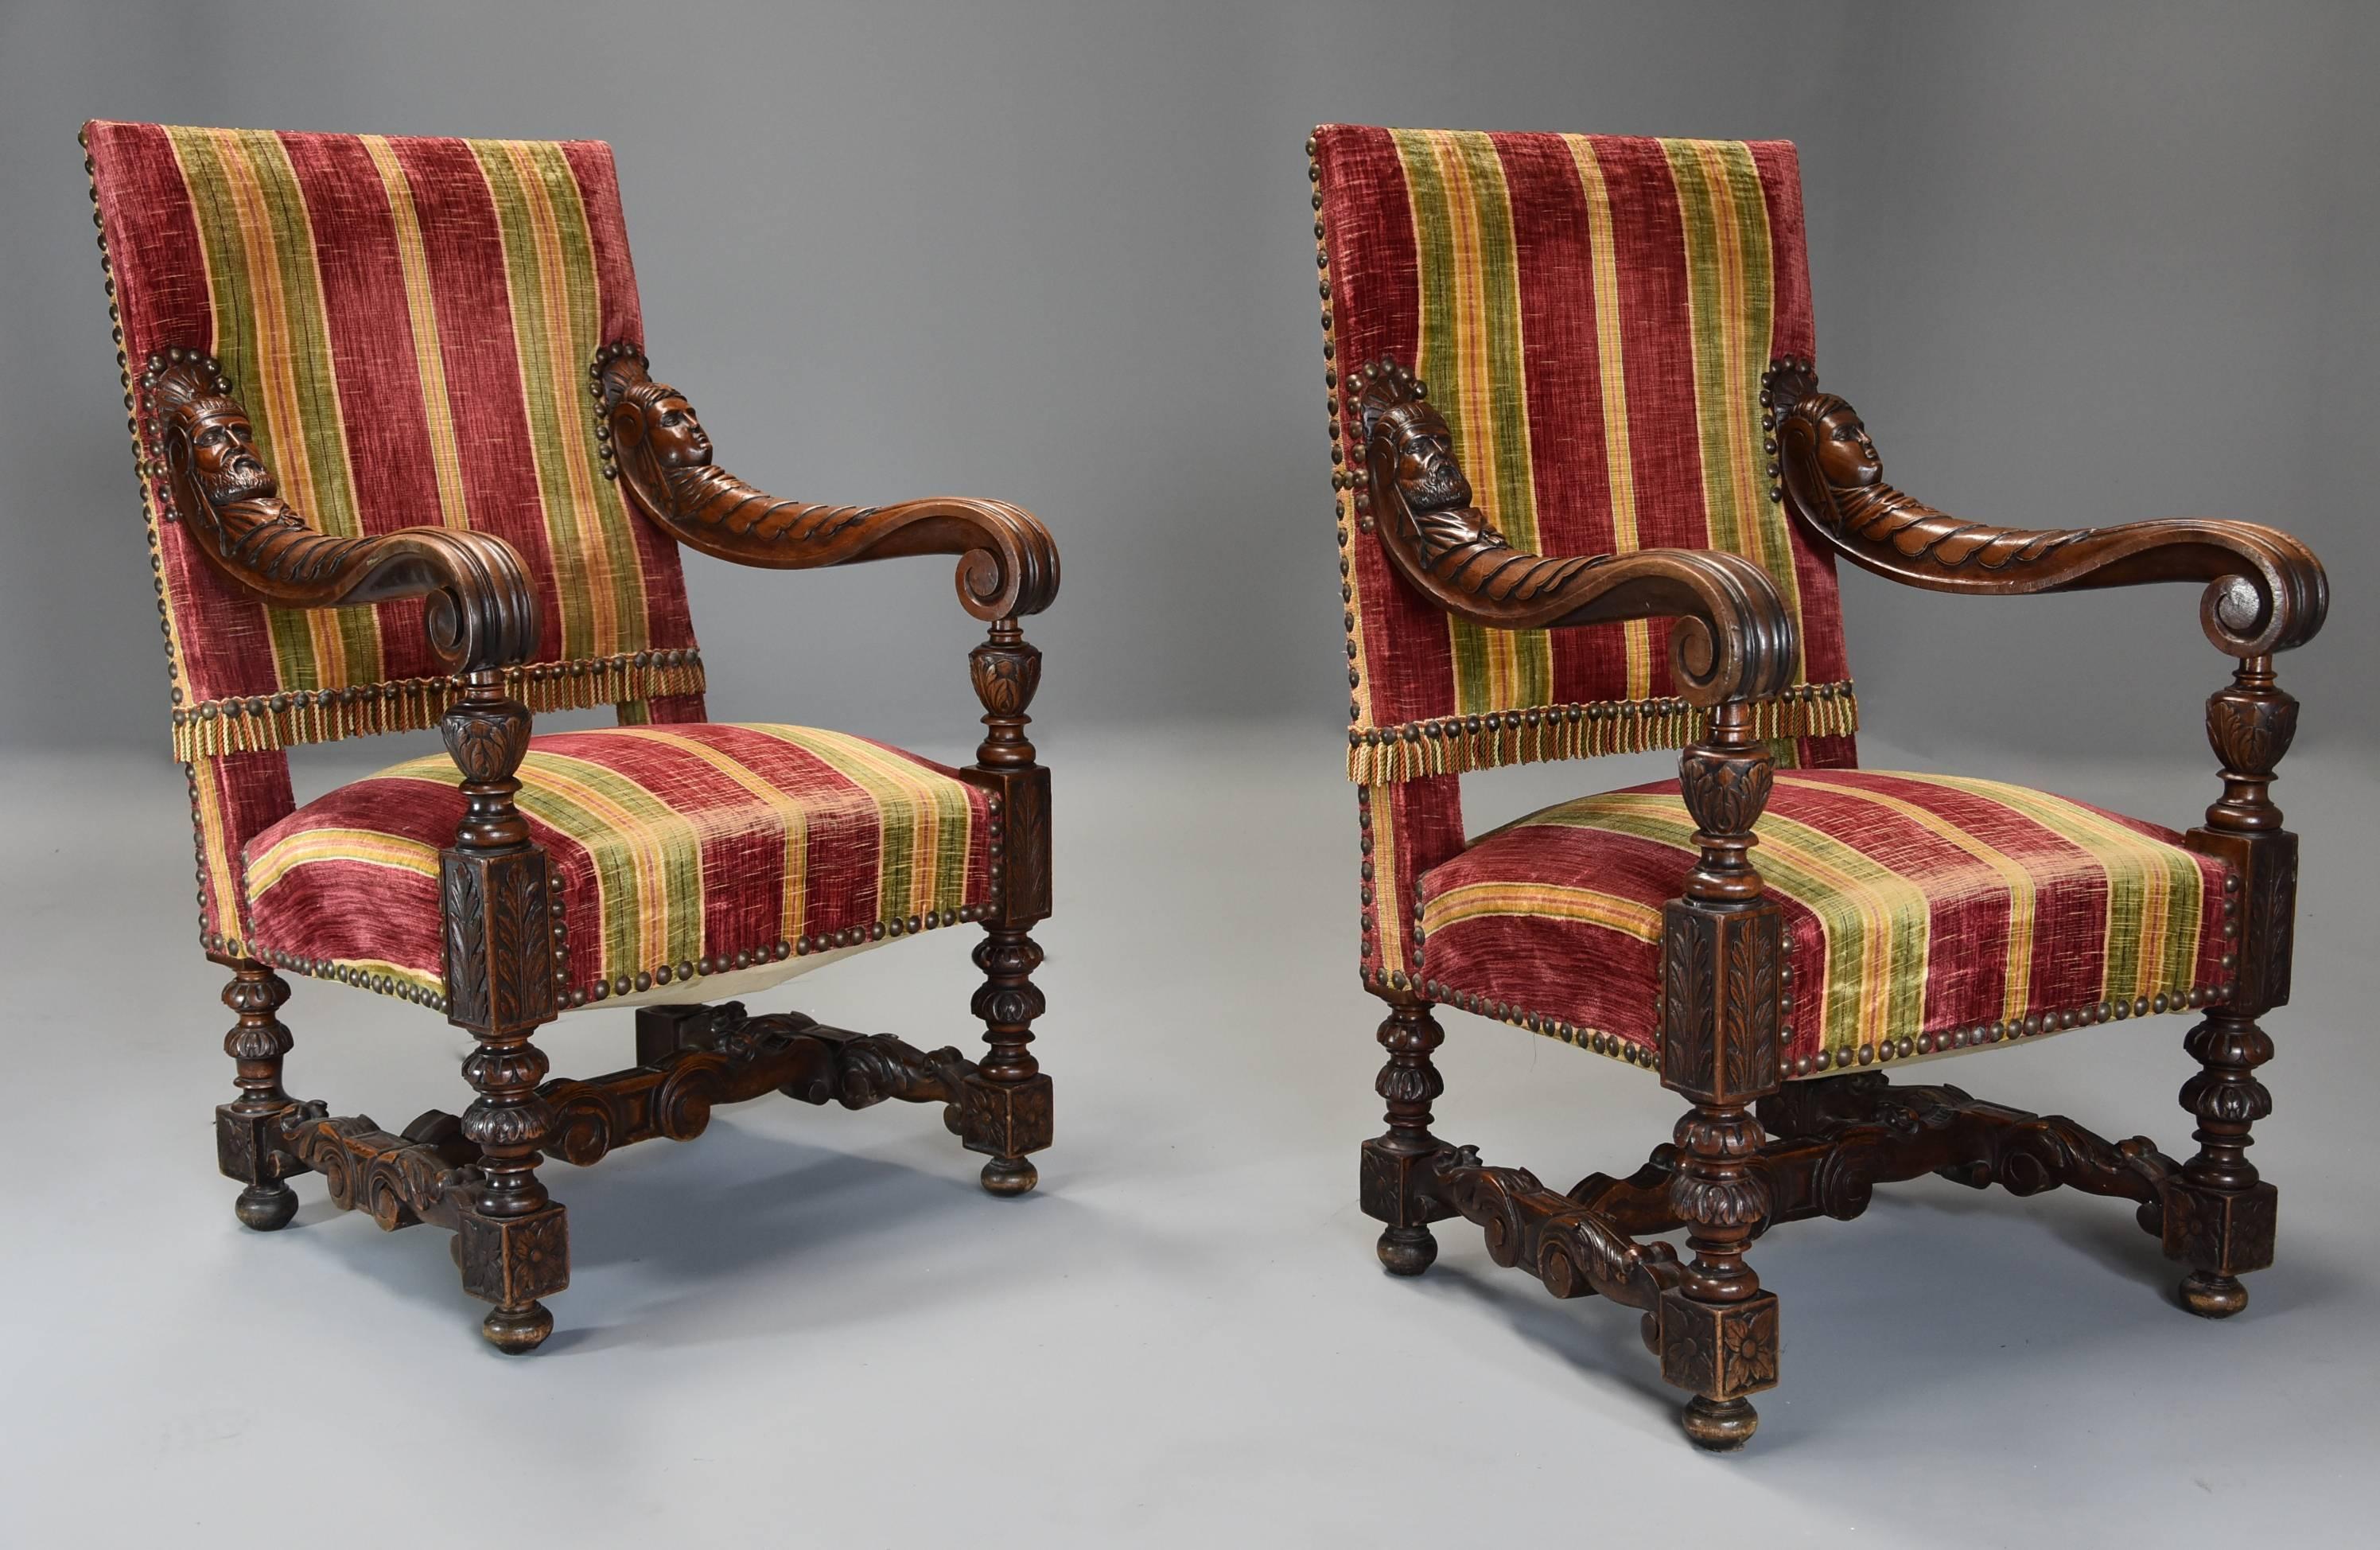 A fine and imposing pair of 19th century French walnut open armchairs in the Baroque style.

This striking pair of chairs consist of an upholstered back leading down to superbly carved scroll arms with carved male and female heads supported by